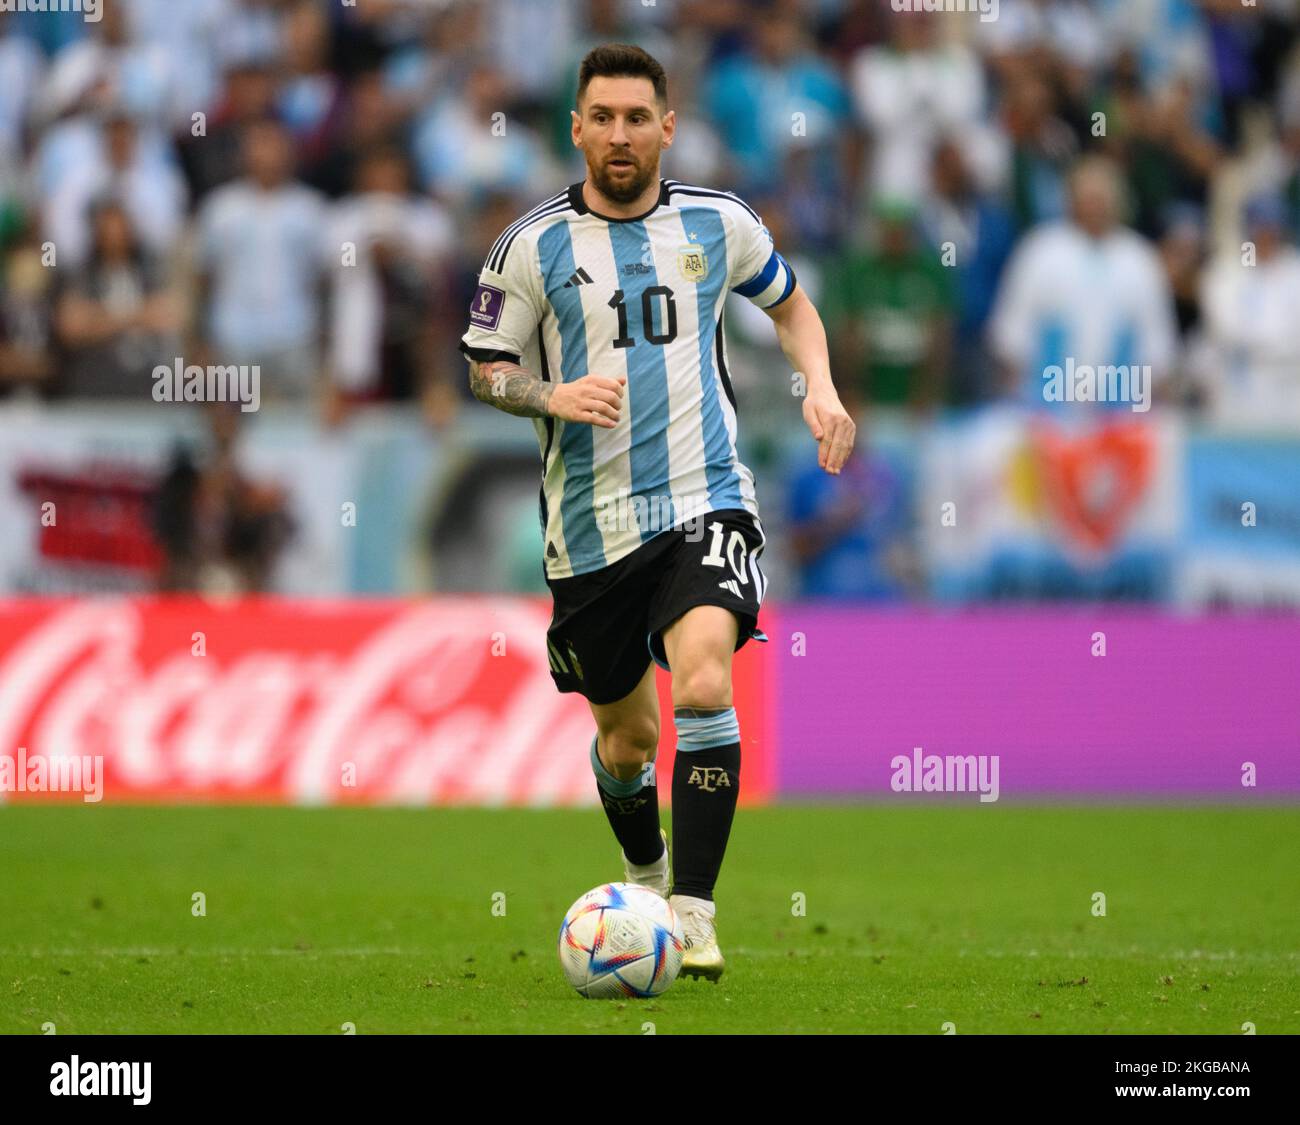 Lusail, Qatar. 22nd Nov, 2022. Soccer: World Cup, Argentina - Saudi Arabia, Preliminary round, Group C, Matchday 1, Lusail Iconic Stadium, Argentina's Lionel Messi plays the ball. Credit: Robert Michael/dpa/Alamy Live News Stock Photo